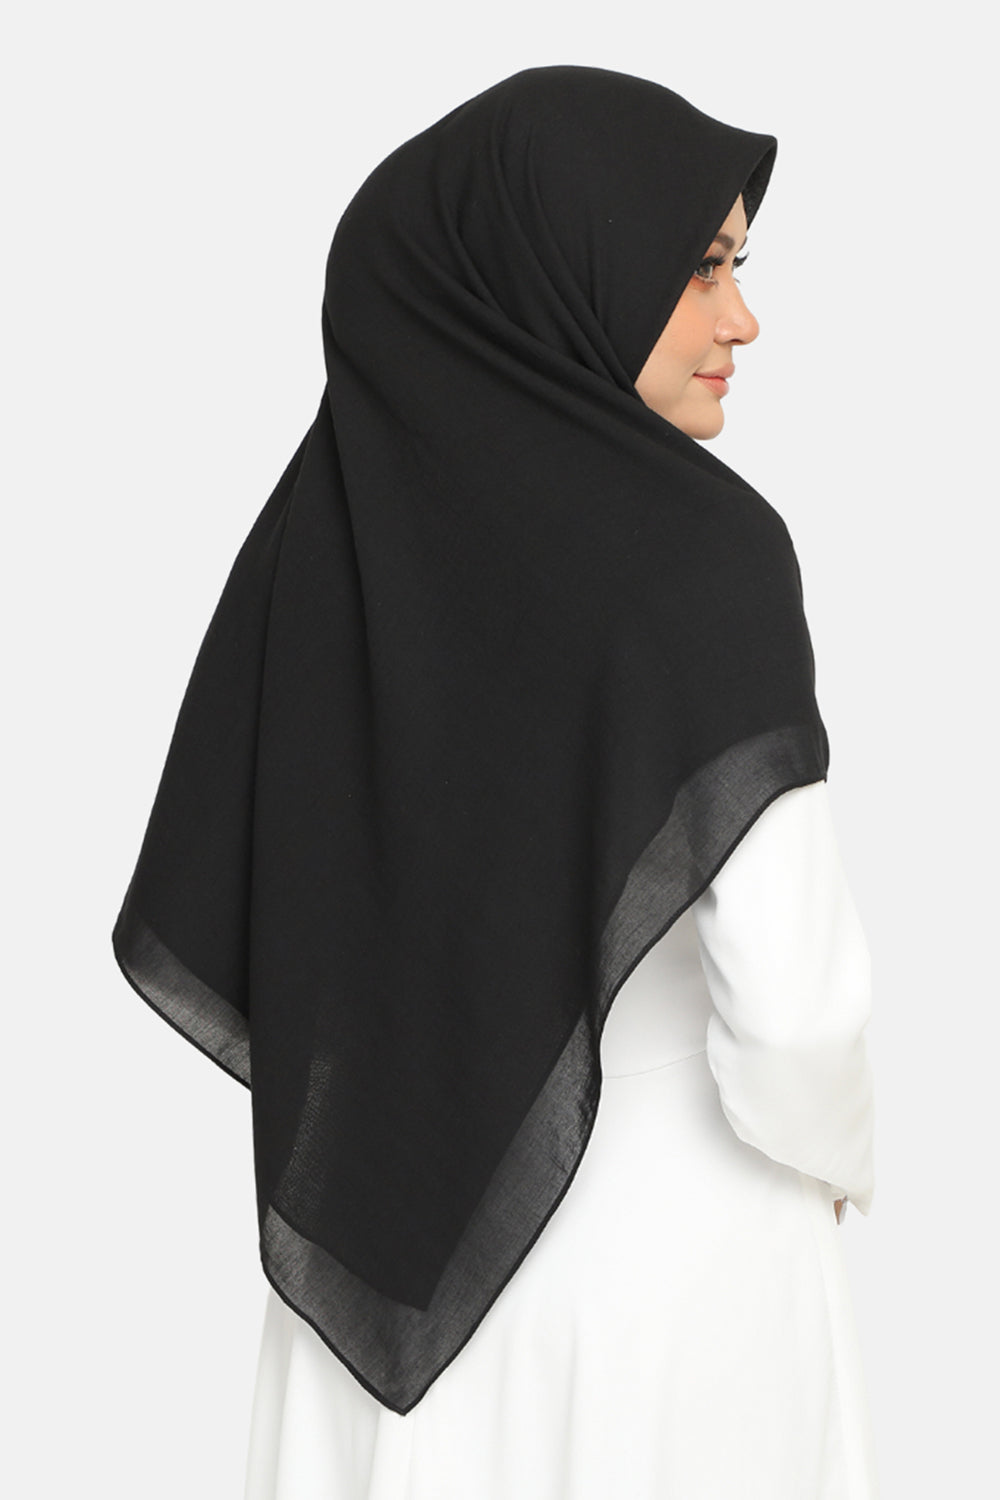 Classic Bawal Only Black